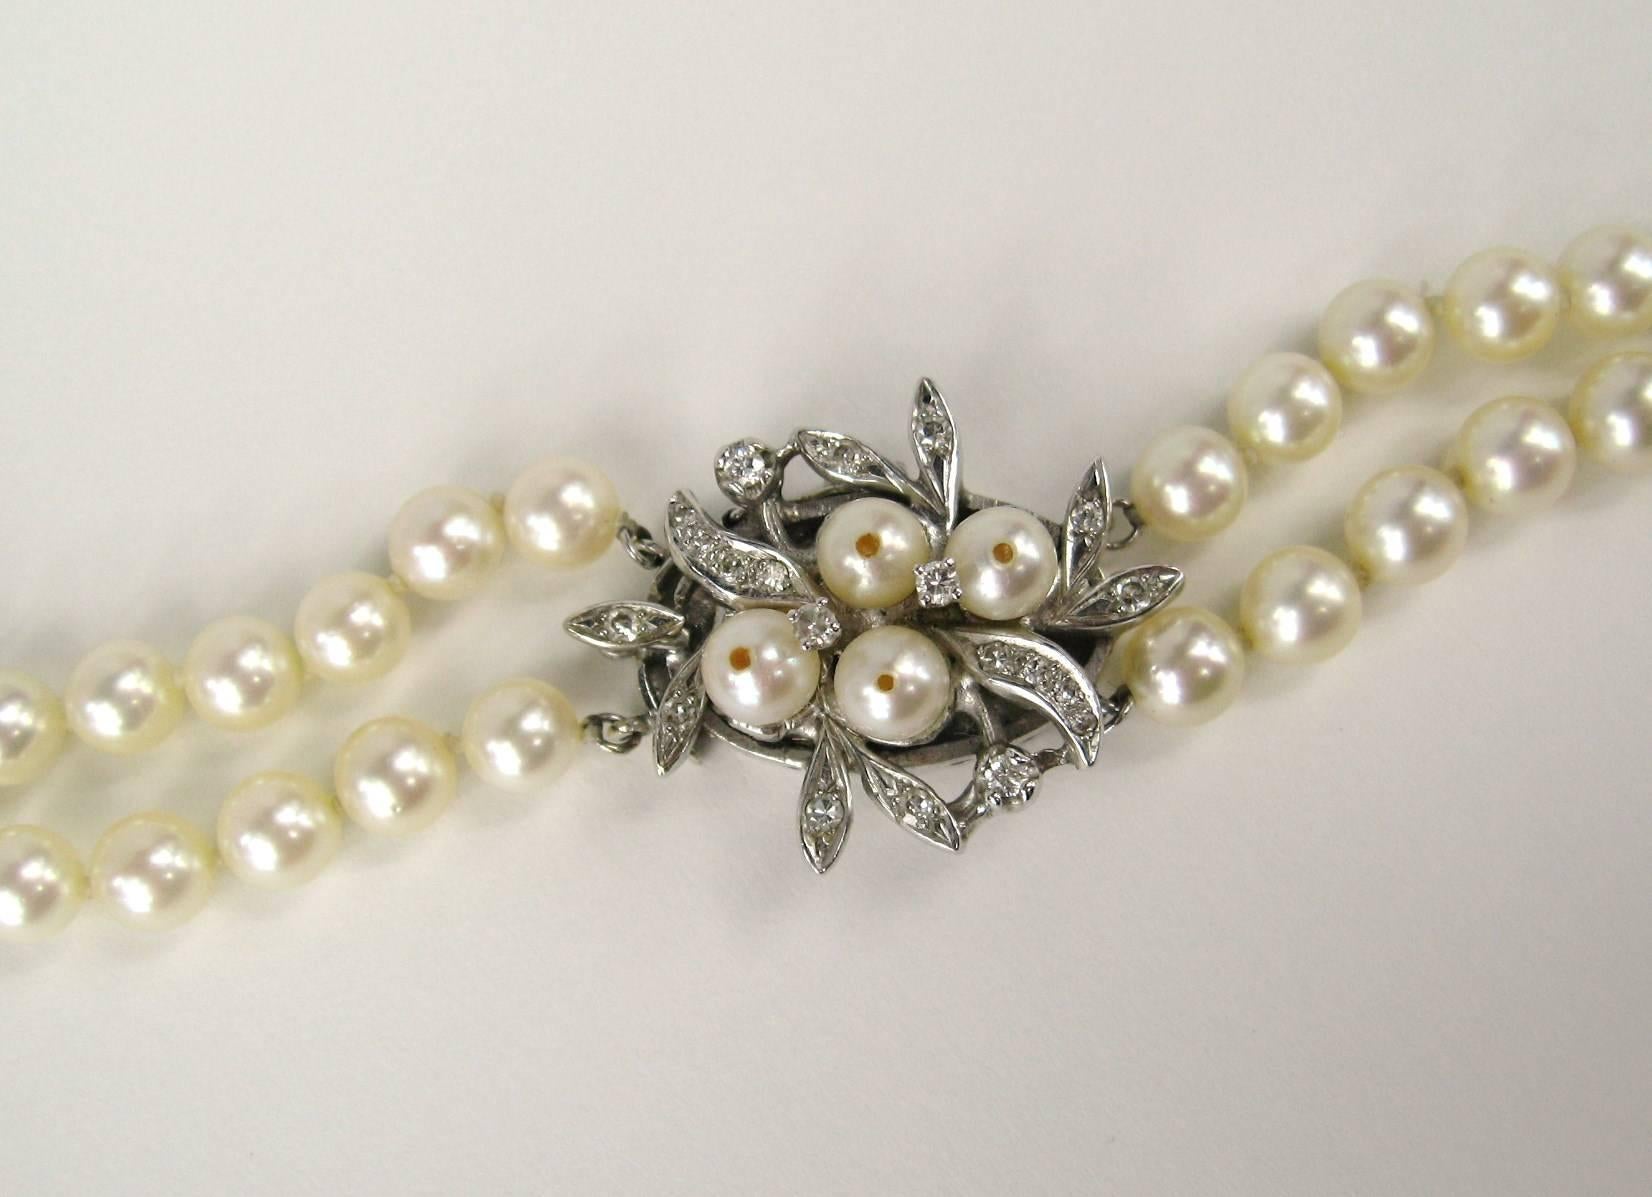 Stunning Double Strand Cultured Pearl Necklace
Floral 14K White Gold Diamond Clasp 
Pearls measure 
8.75mm down to 5.50mm 
Slide in clasp 
17 in Long on lowest strand
Any questions please call or hit request more information 